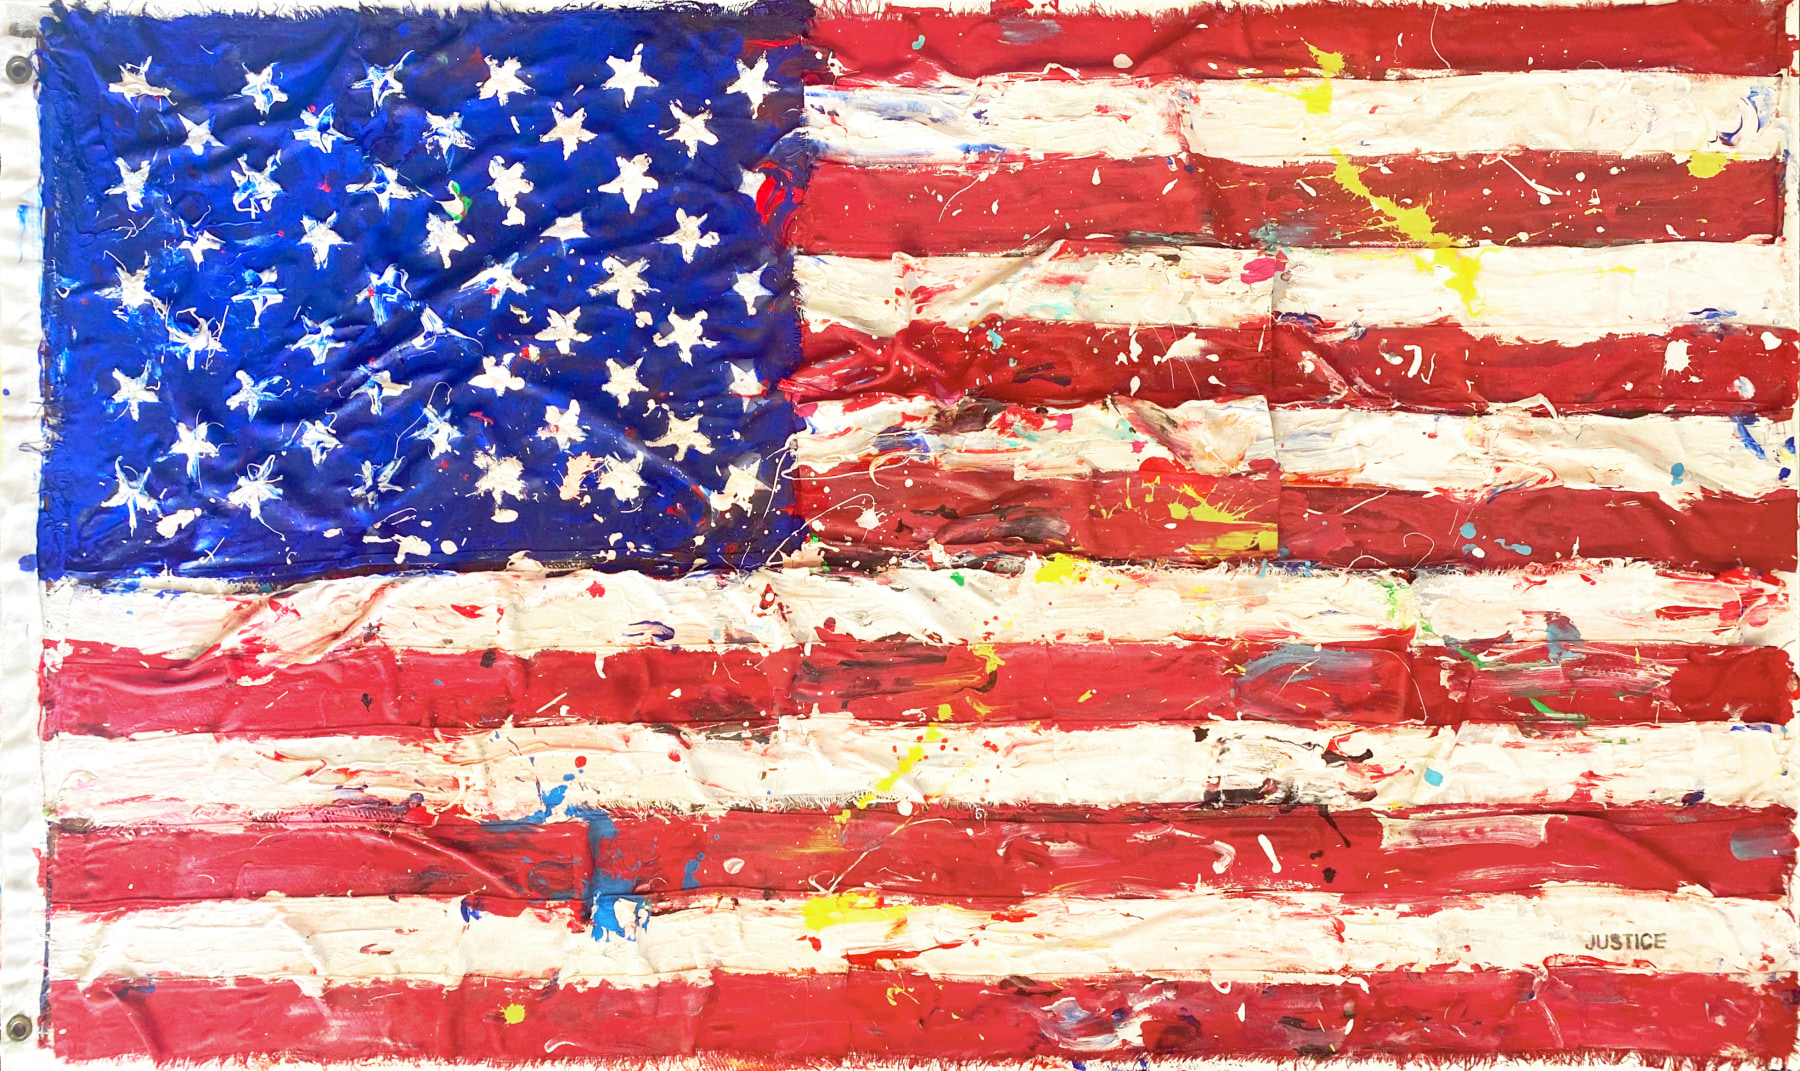 Christopher Justice,&amp;nbsp;Stars and Stripes, 2023,

Mixed Media on Wood, 36 x 60 inches